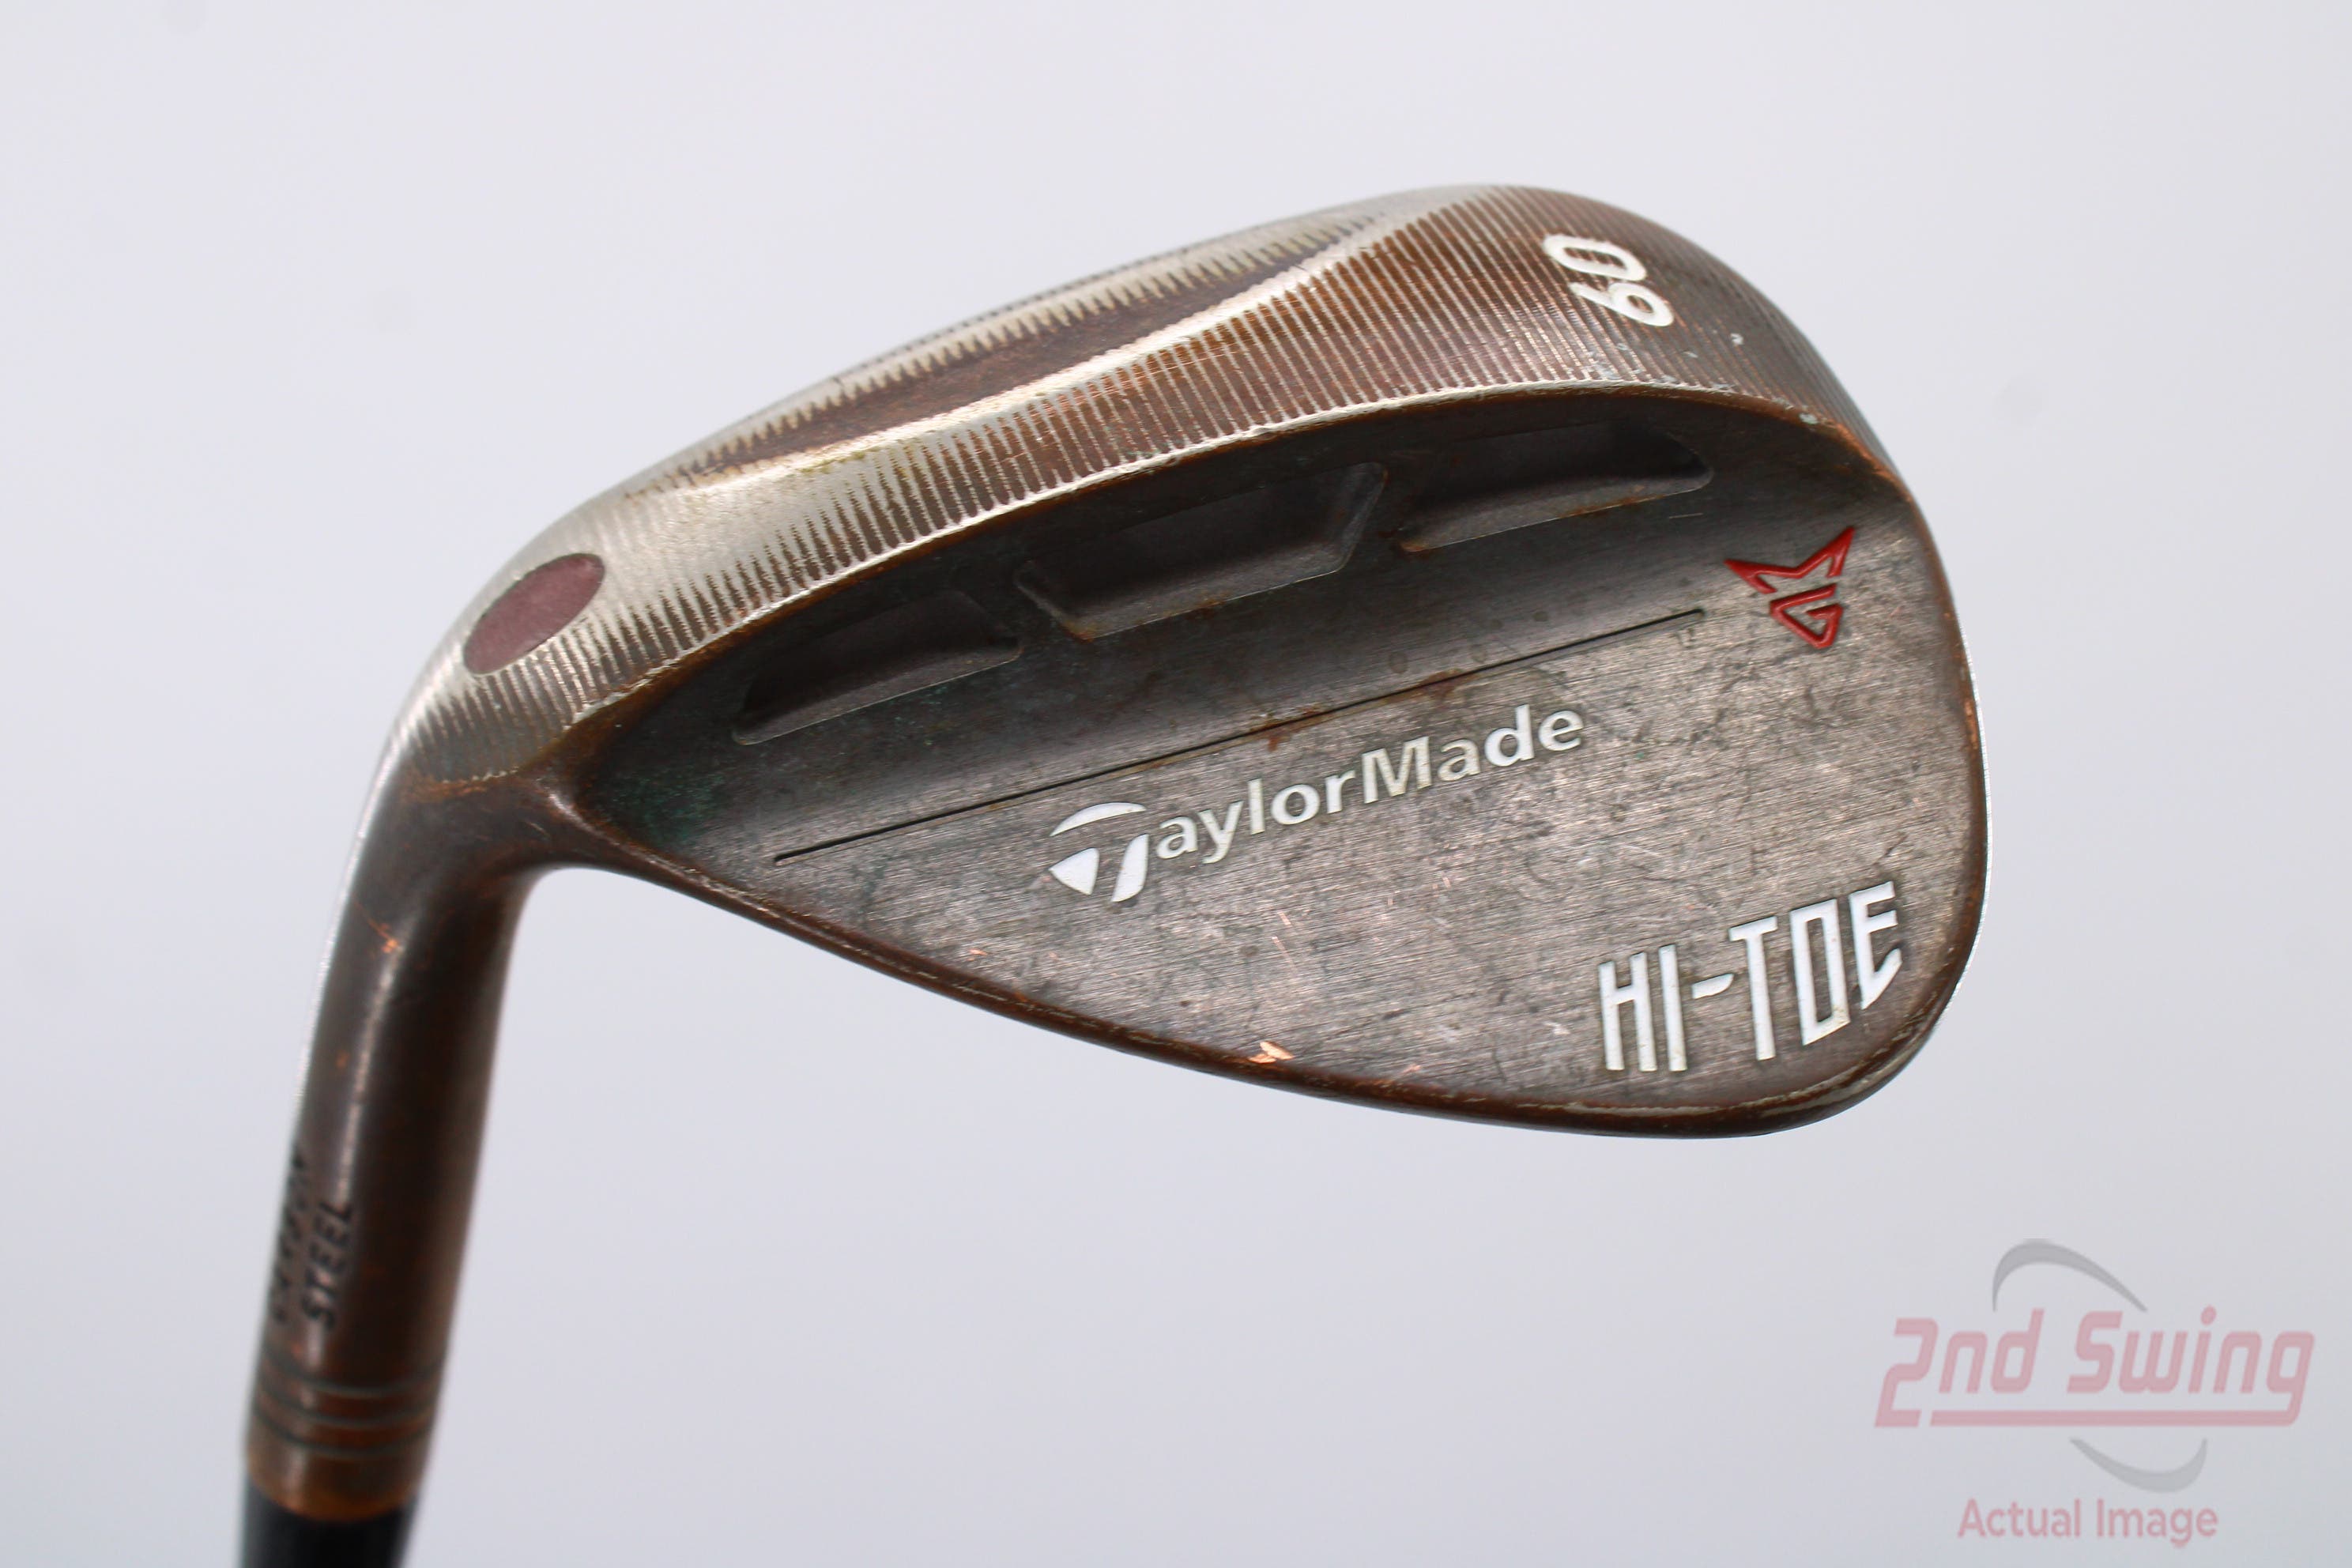 TaylorMade Milled Grind HI-TOE Wedge (A-D2228126345) | 2nd Swing Golf